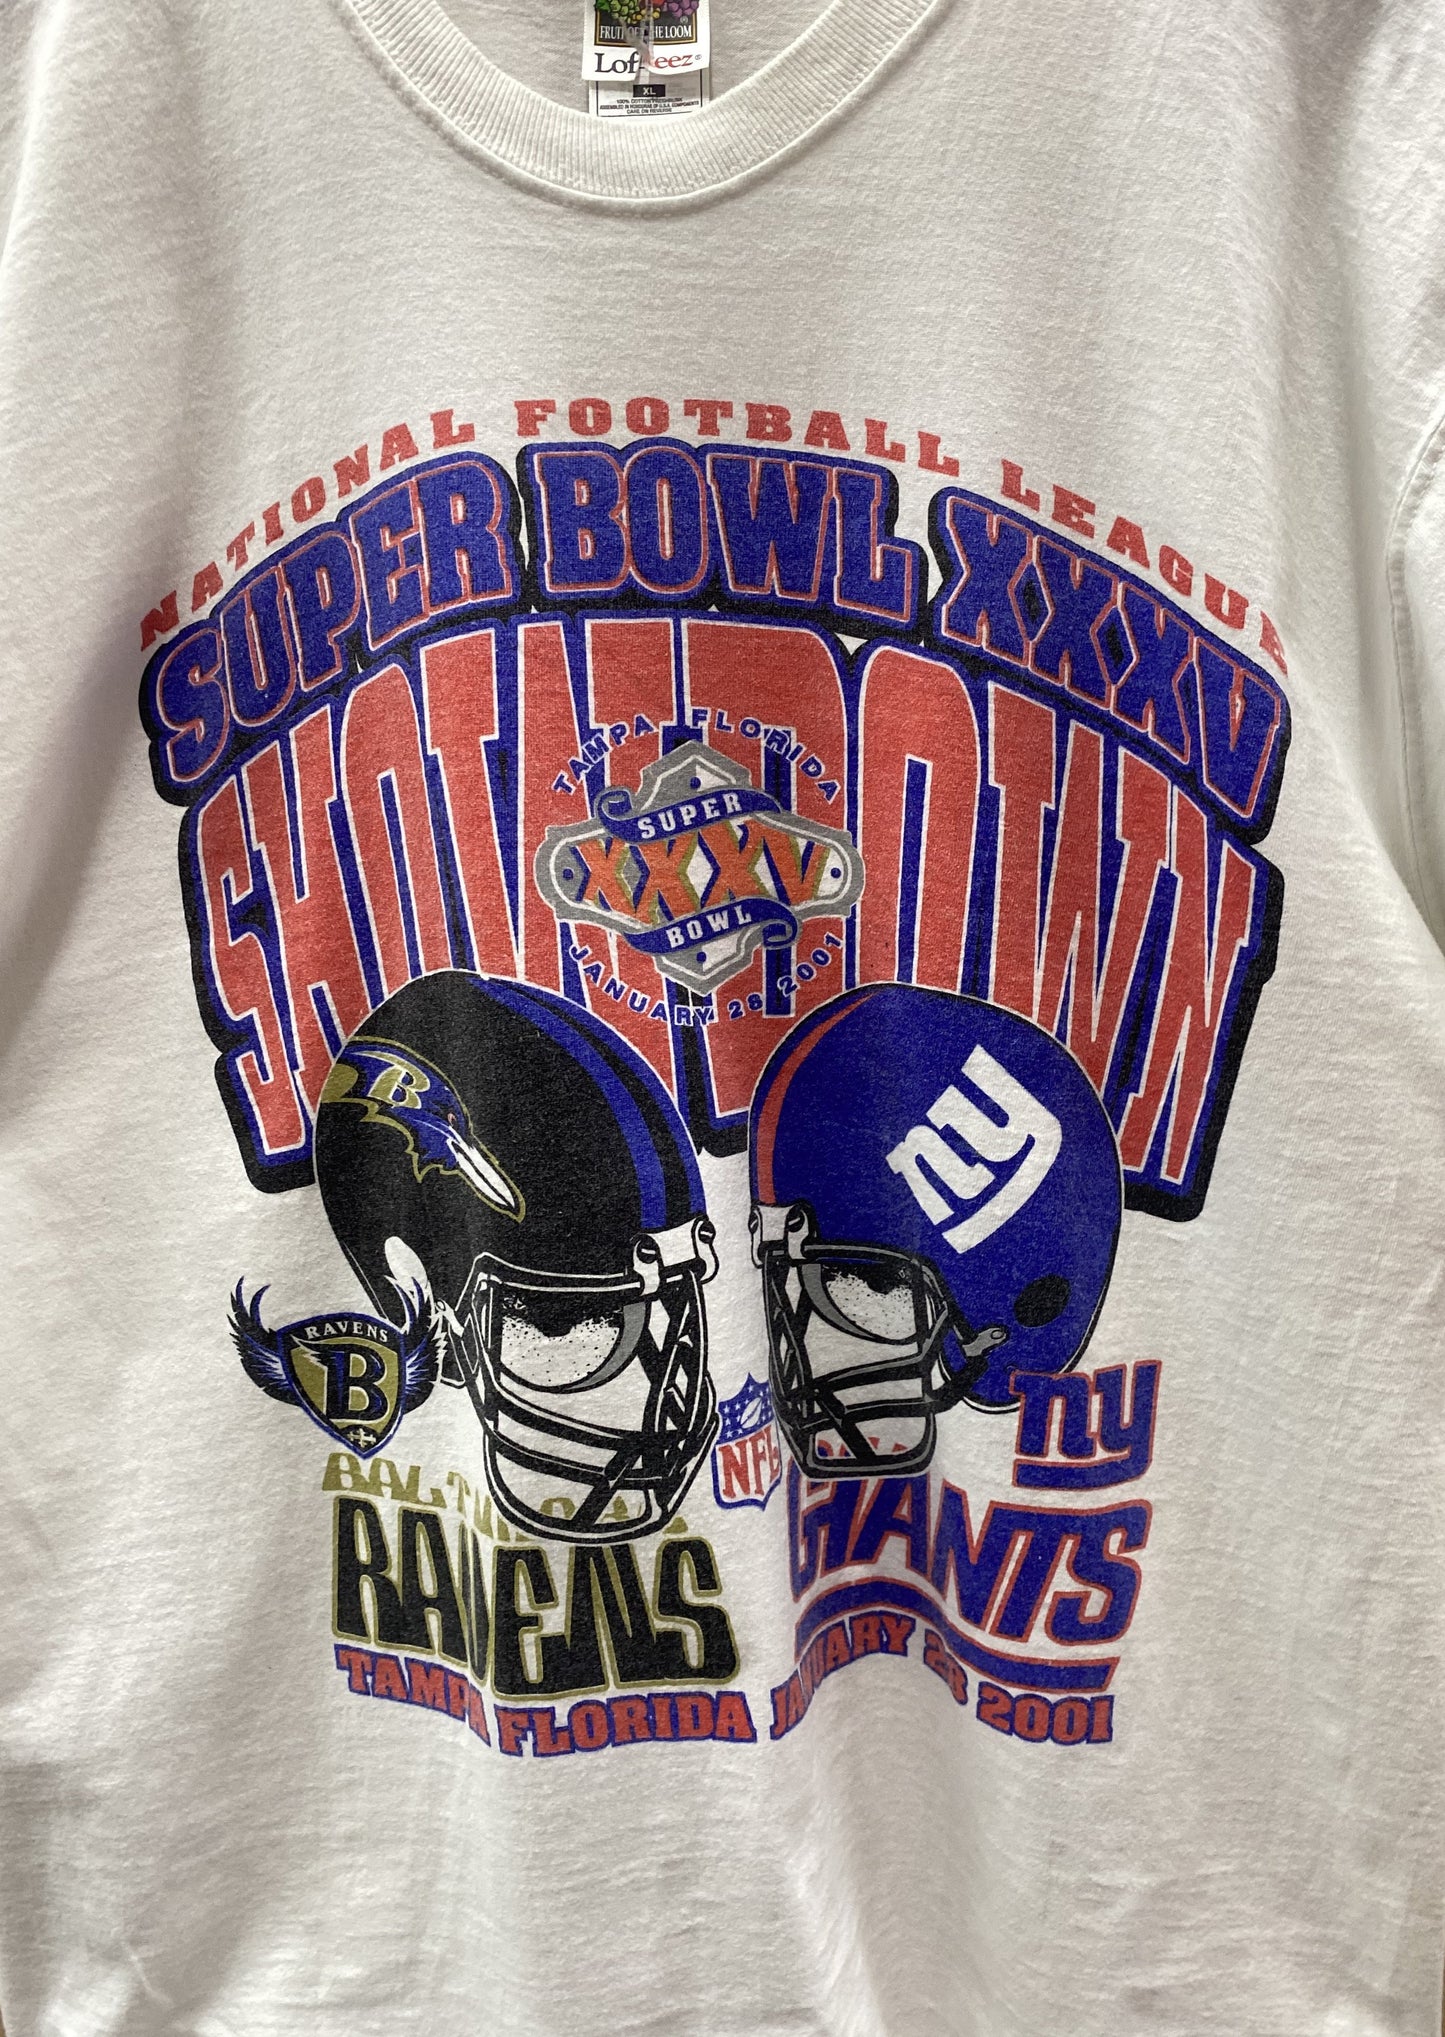 Load image into Gallery viewer, 2001 Superbowl Showdown Giants/Ravens T-Shirt (4811525816400)
